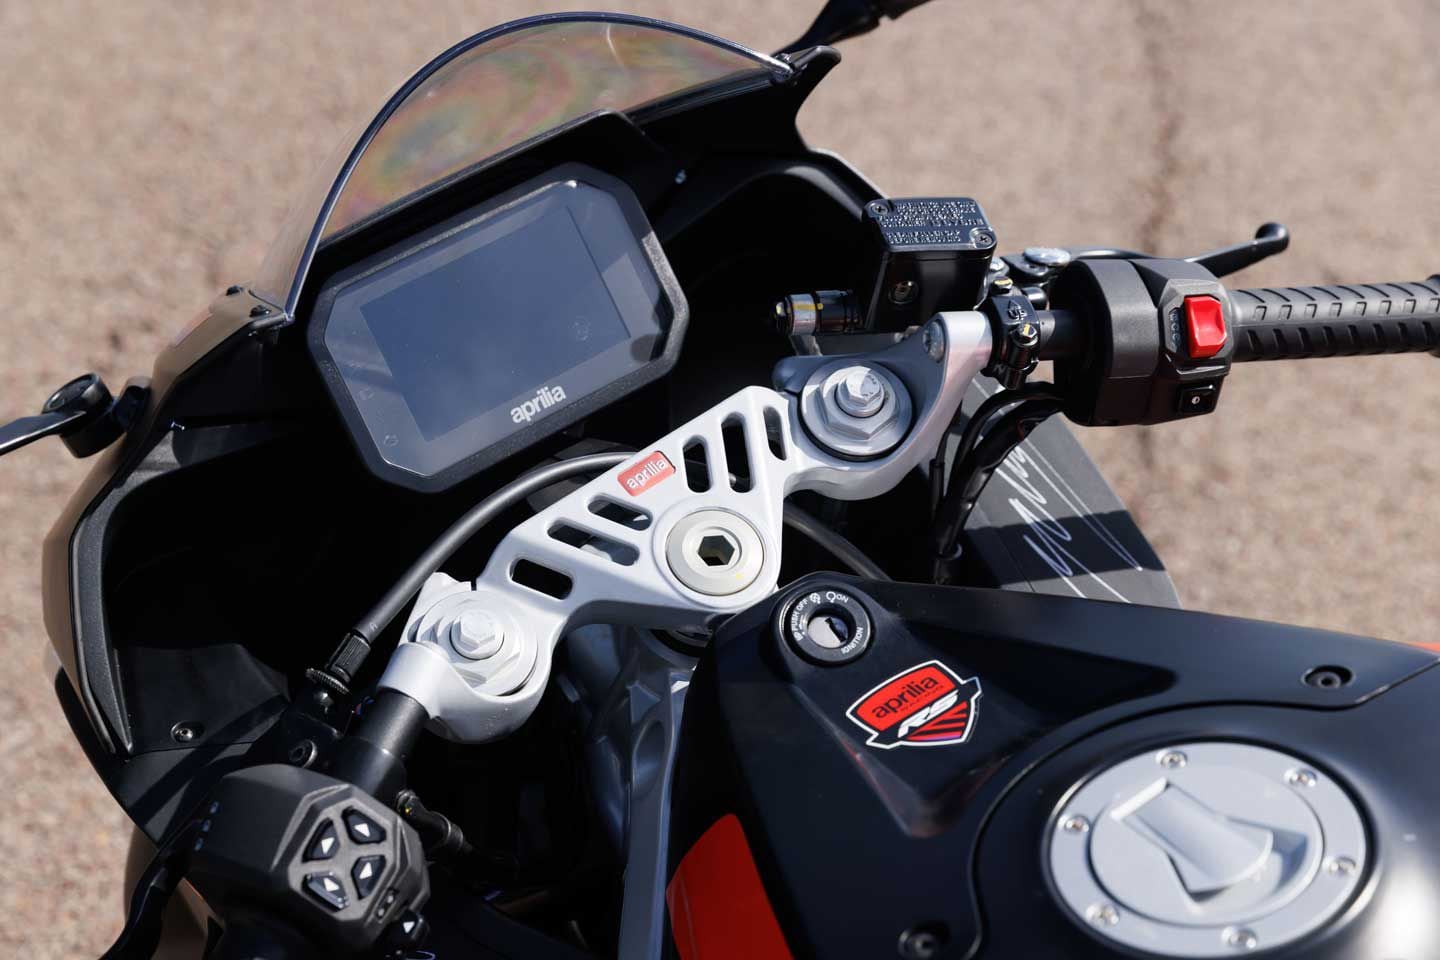 The up and down arrows on the left switch cube allow the rider to adjust ATC (Aprilia Traction Control) on the fly. On the right-hand switch cube, the square button under the start/stop switch allows the rider to cycle through the three ride modes (Sport, Eco, Rain).